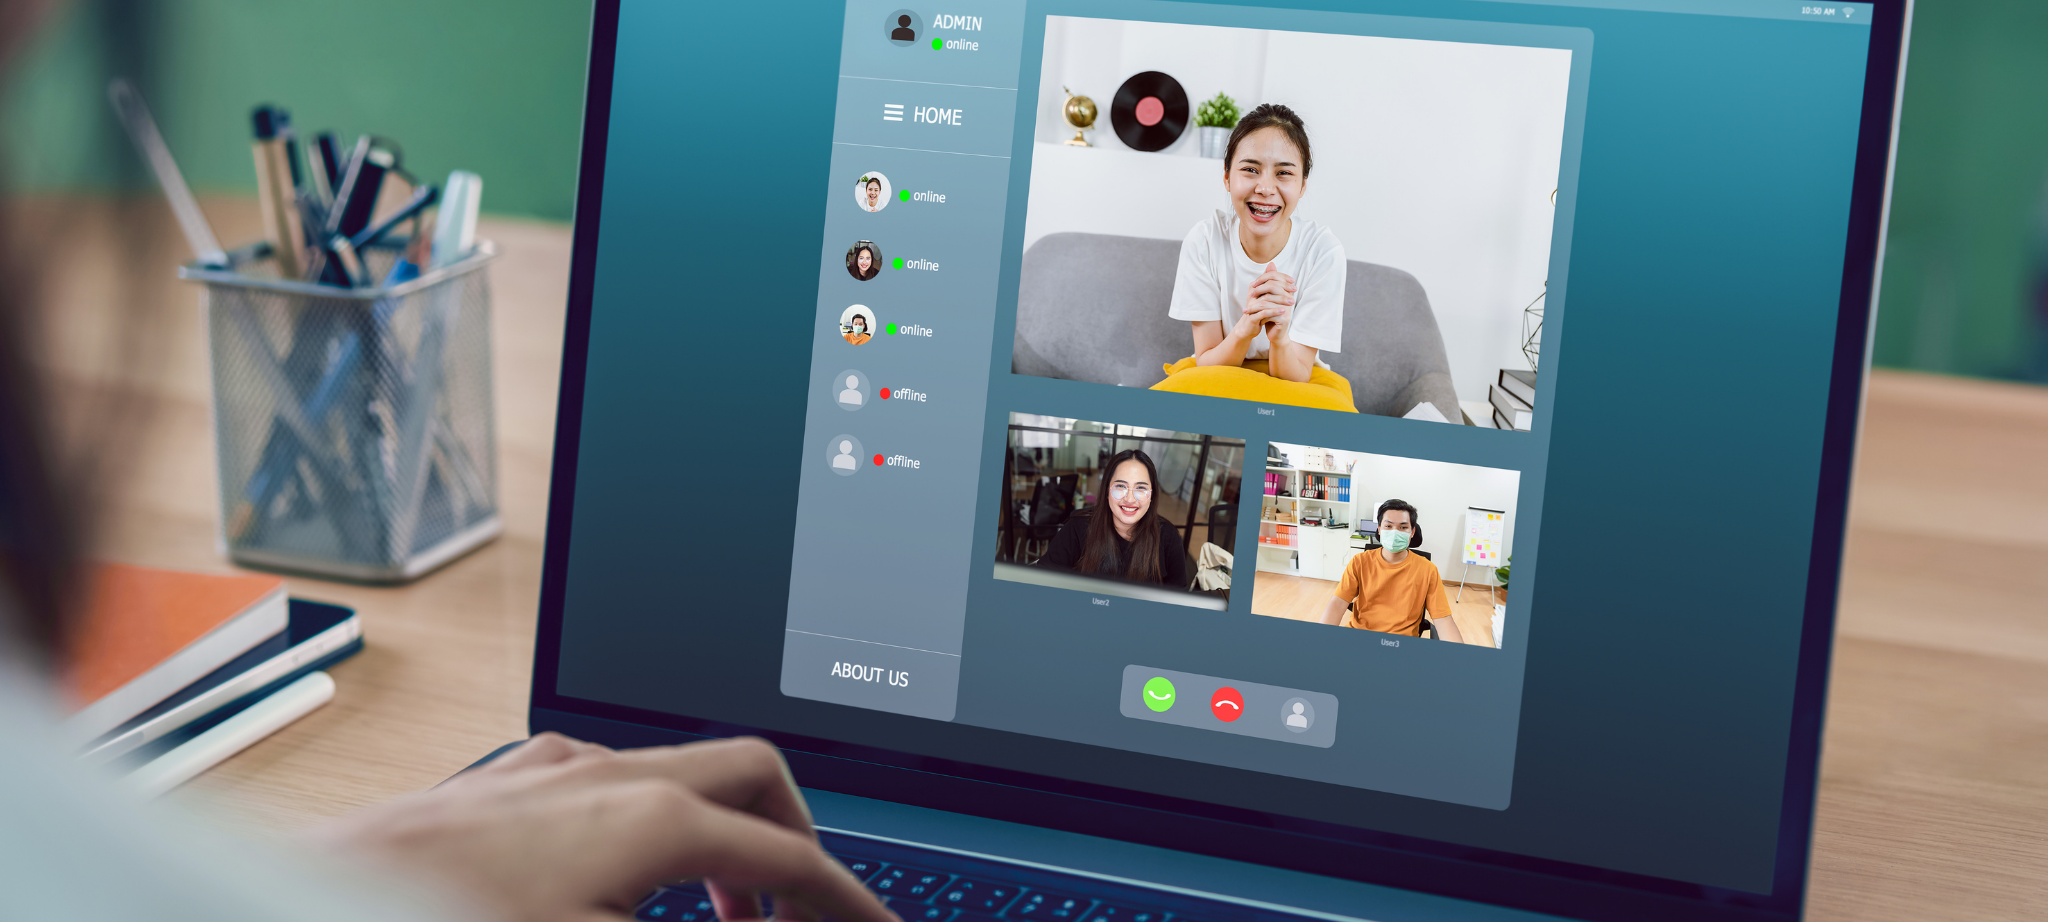 Video Conferencing: 7 Businesses You Can Start From Home